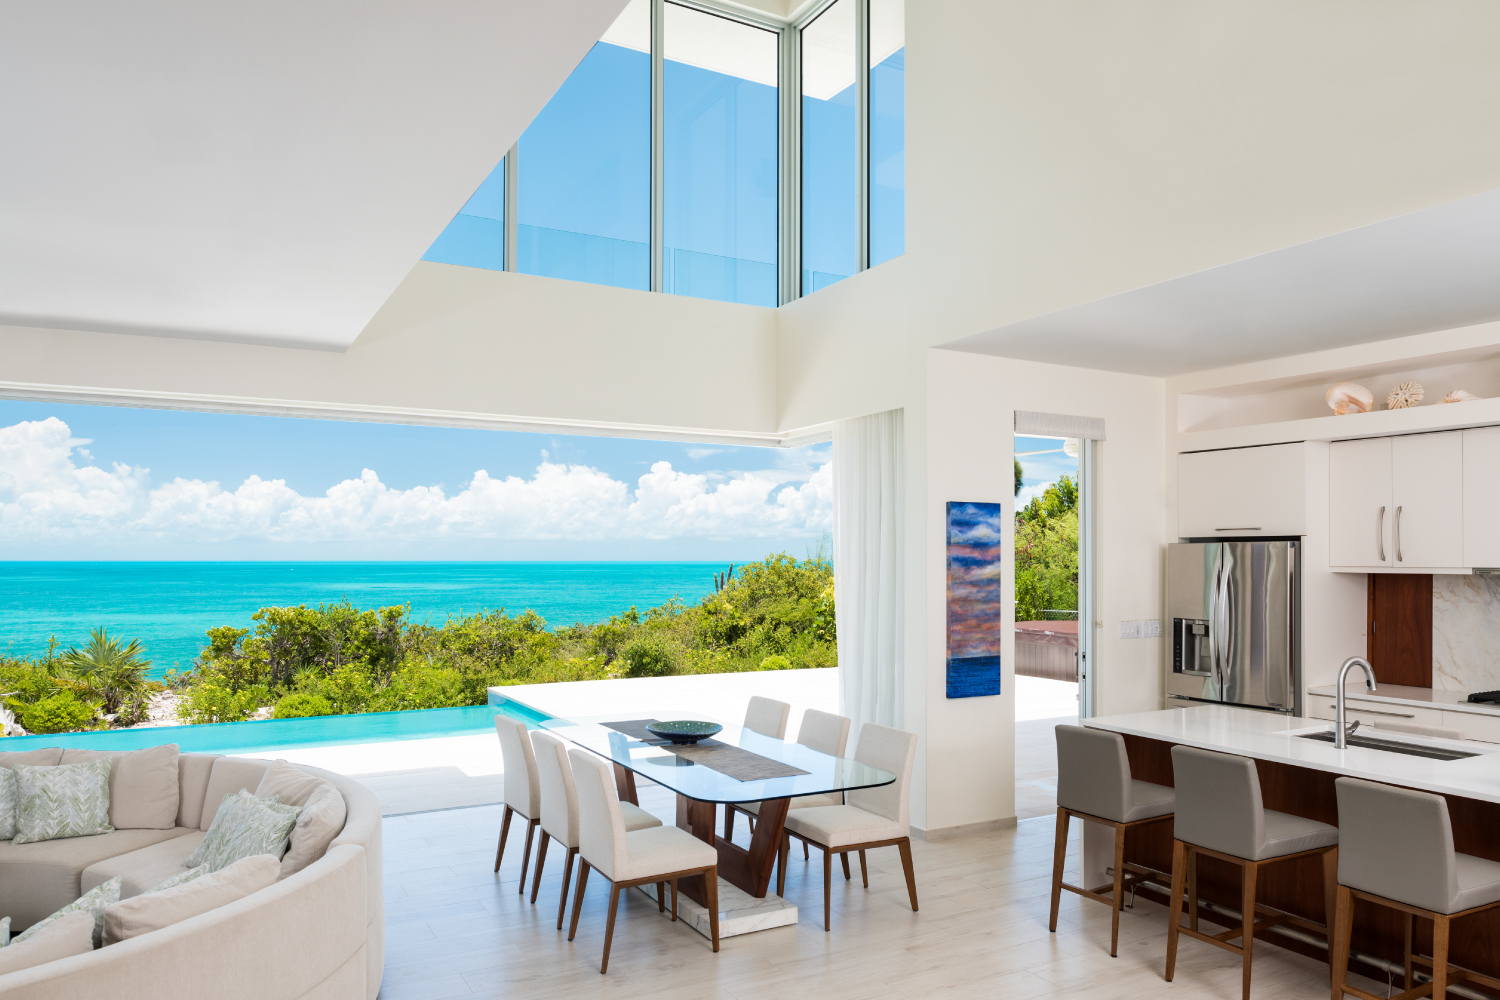 A luxurious, contemporary home in Providenciales.